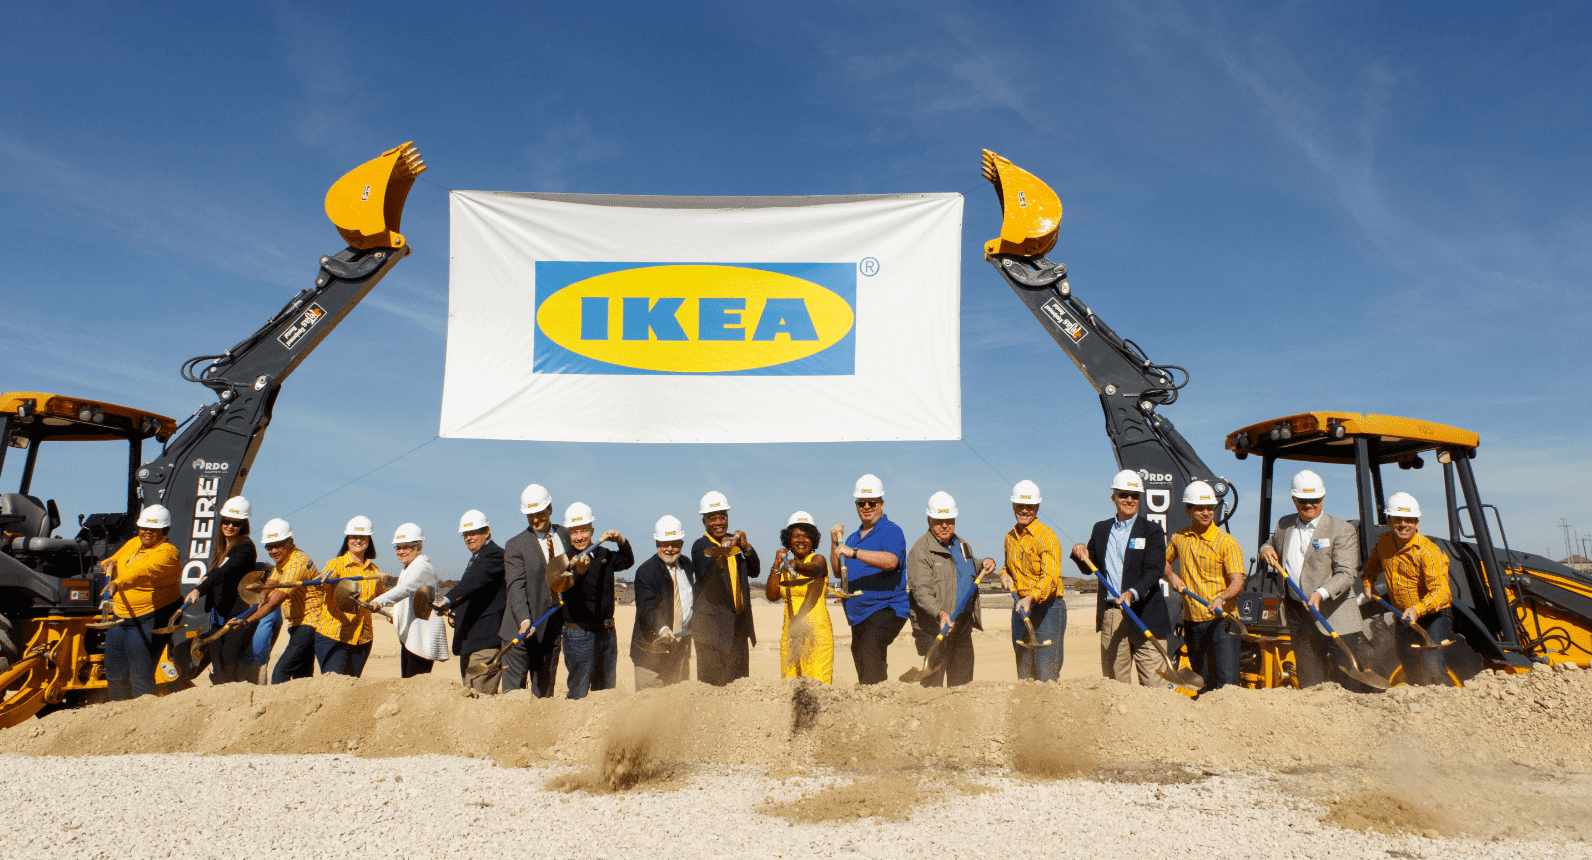 Buy Now & Pay Later – IKEA & Afterpay - IKEA